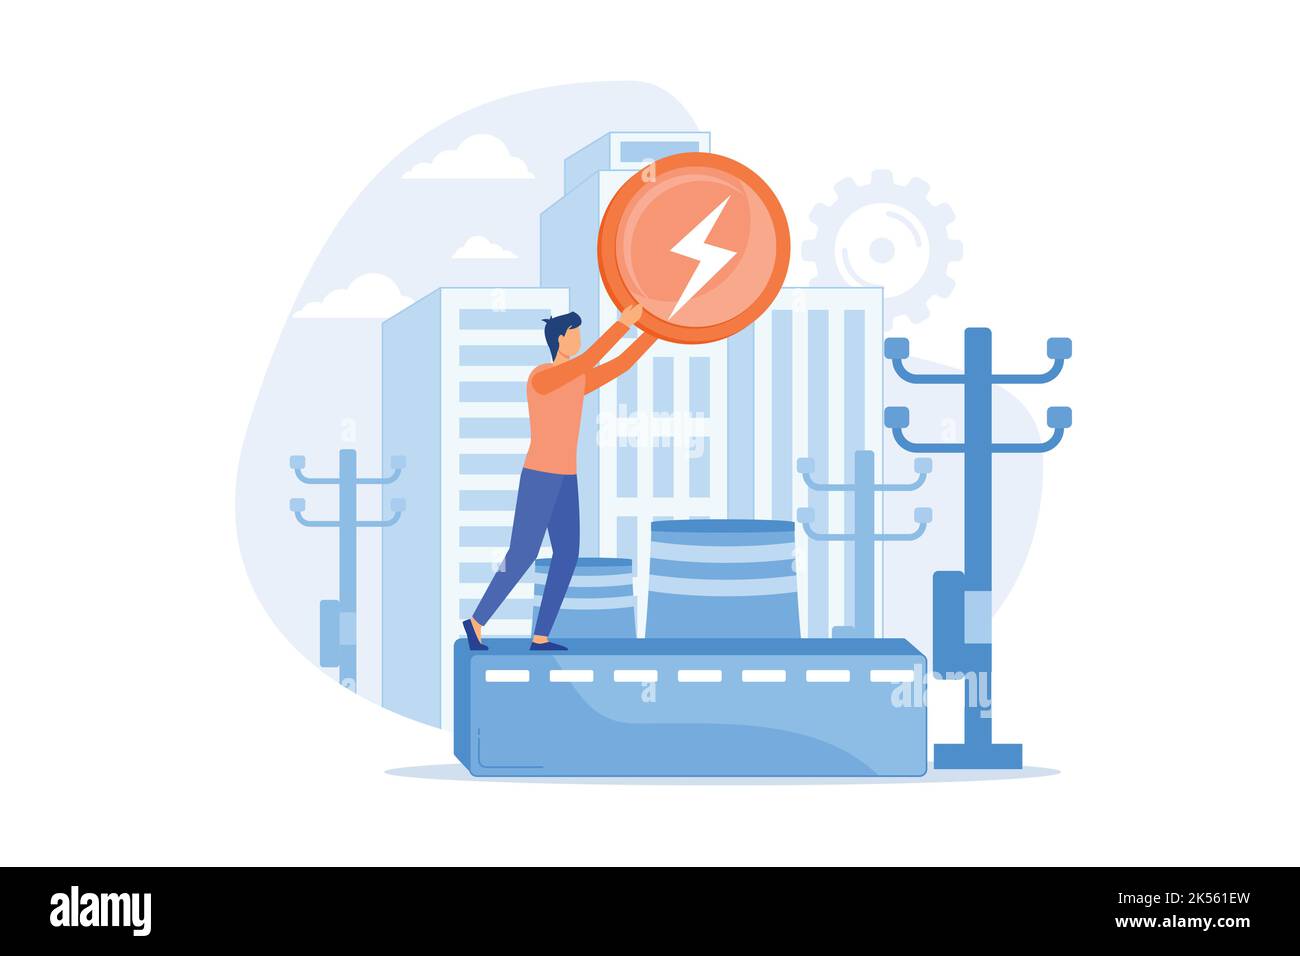 Power plant, electric industry, energy production. Electricity generation fabric, power substation, electrical energy source metaphor. Vector illustra Stock Vector